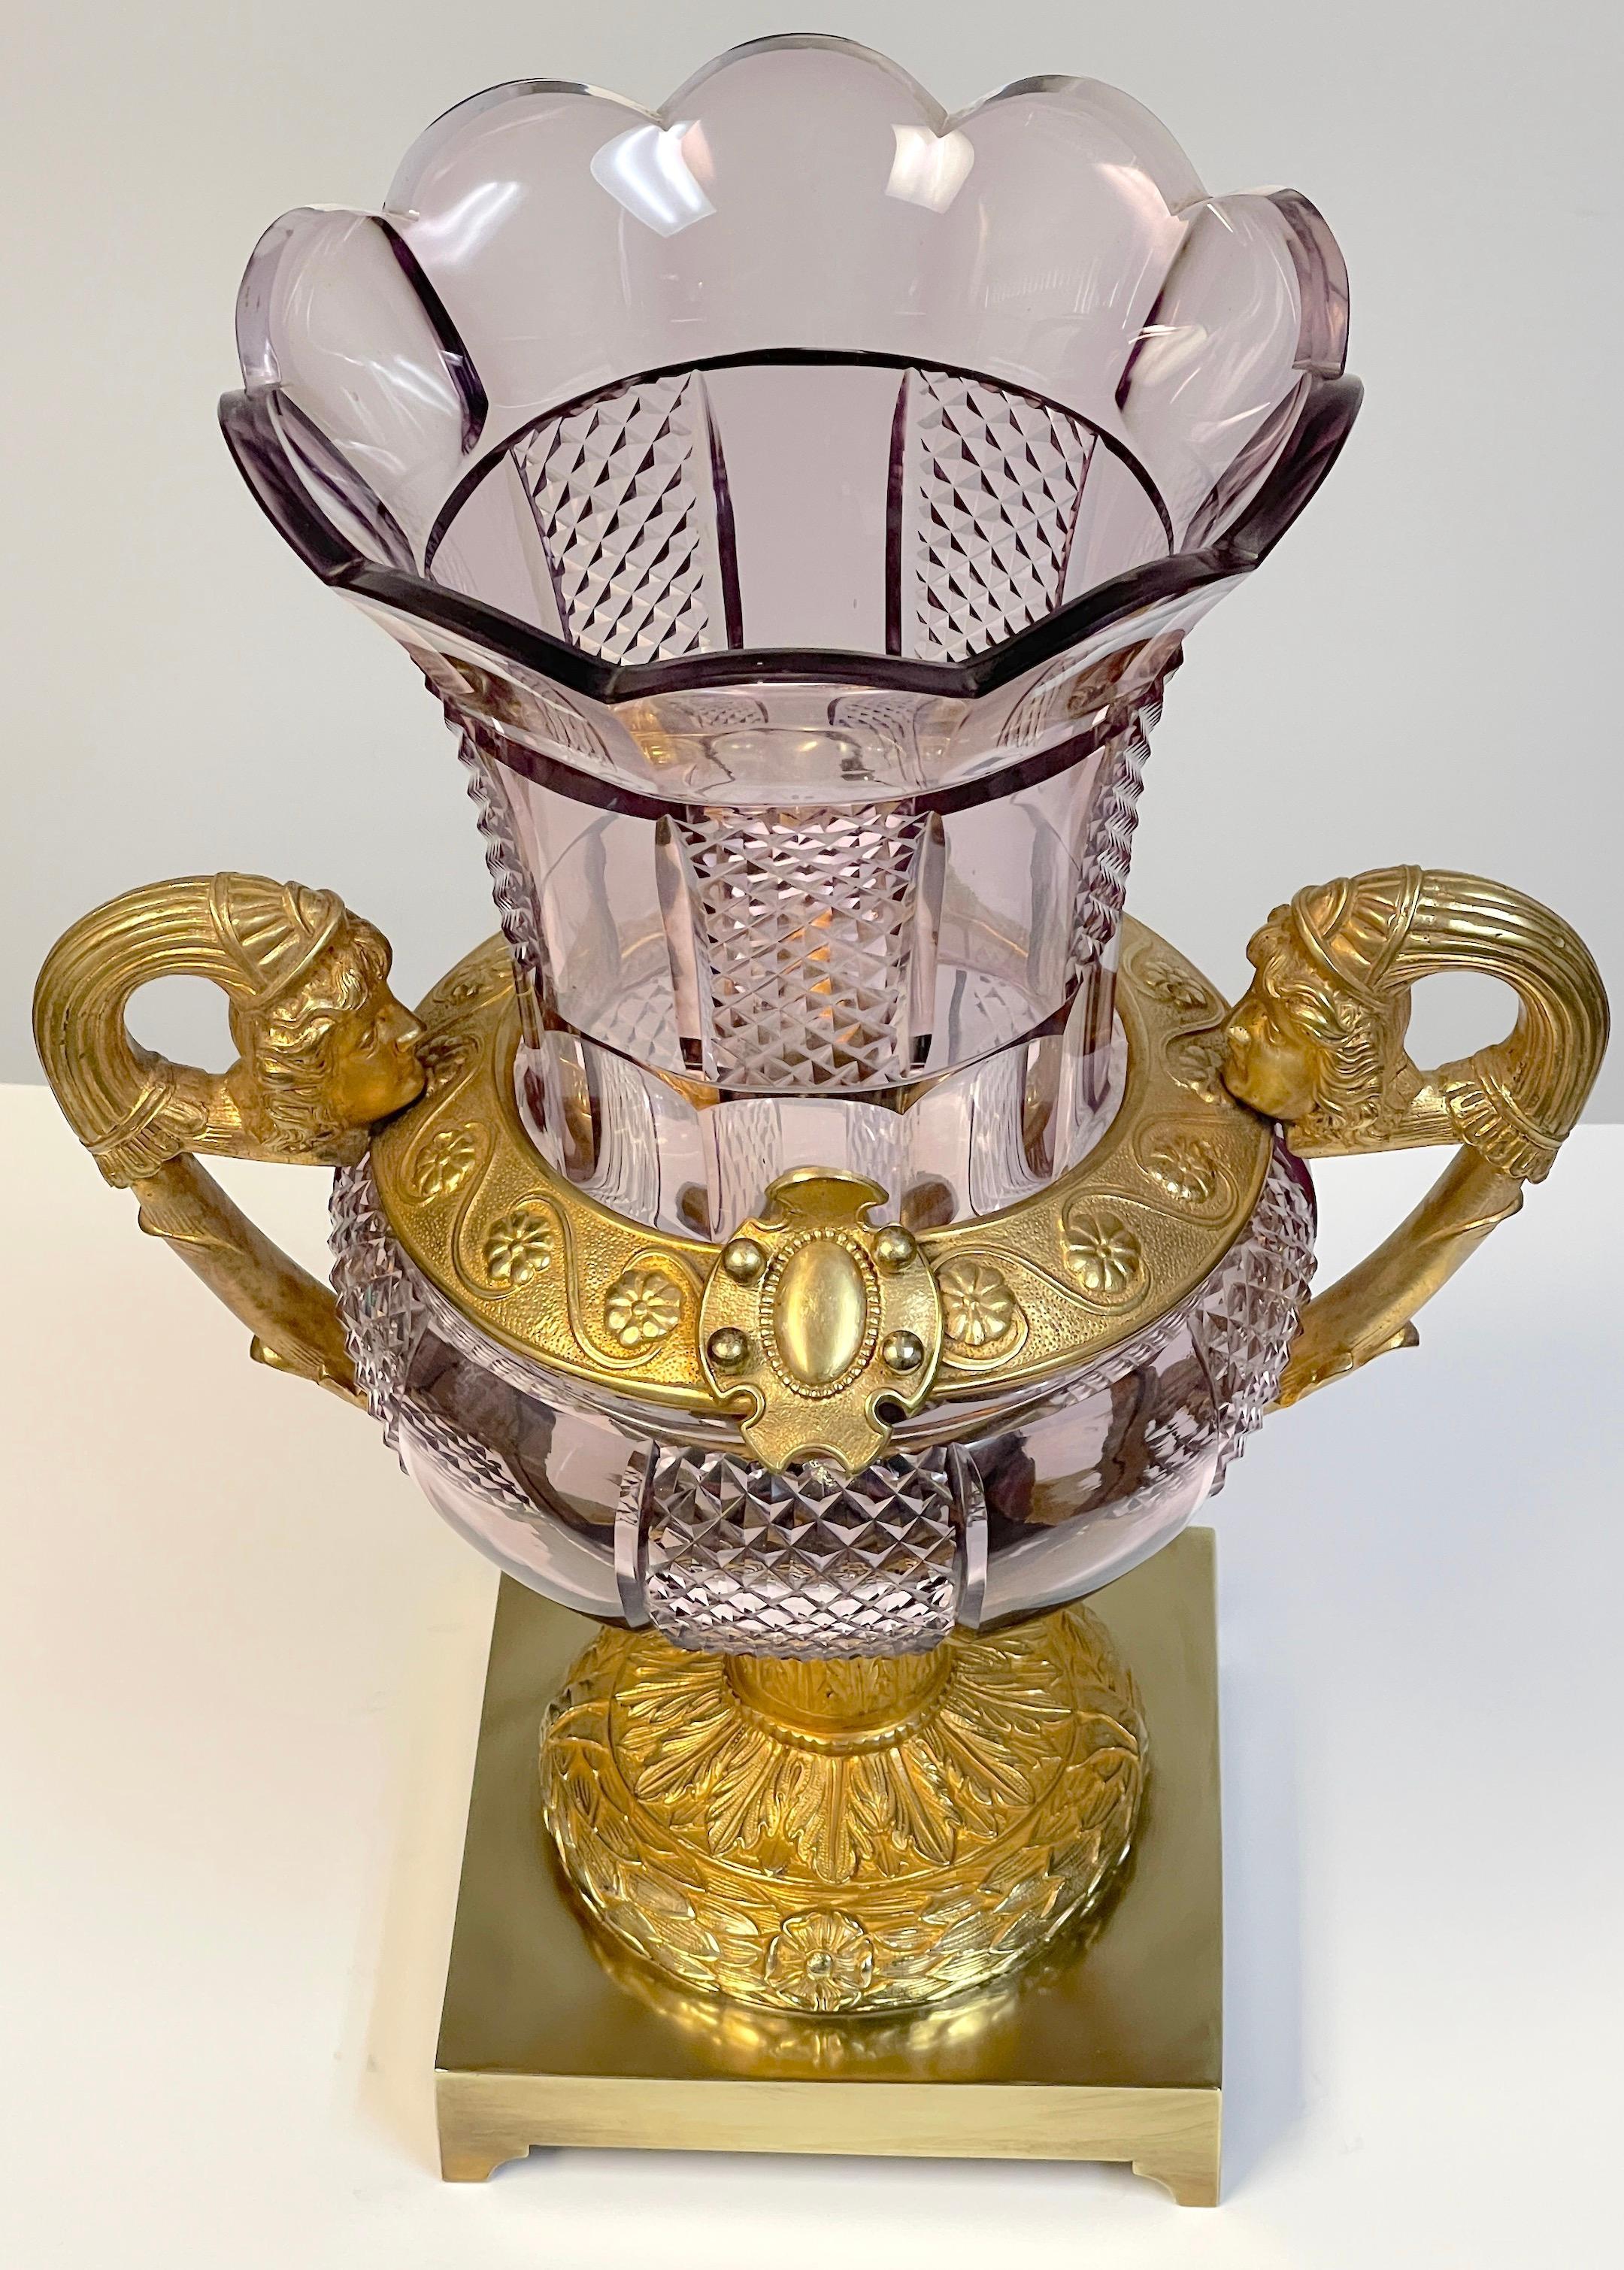 Large 19th Century Russian Neoclassical Ormolu and Amethyst Cut Glass Vase In Good Condition For Sale In West Palm Beach, FL